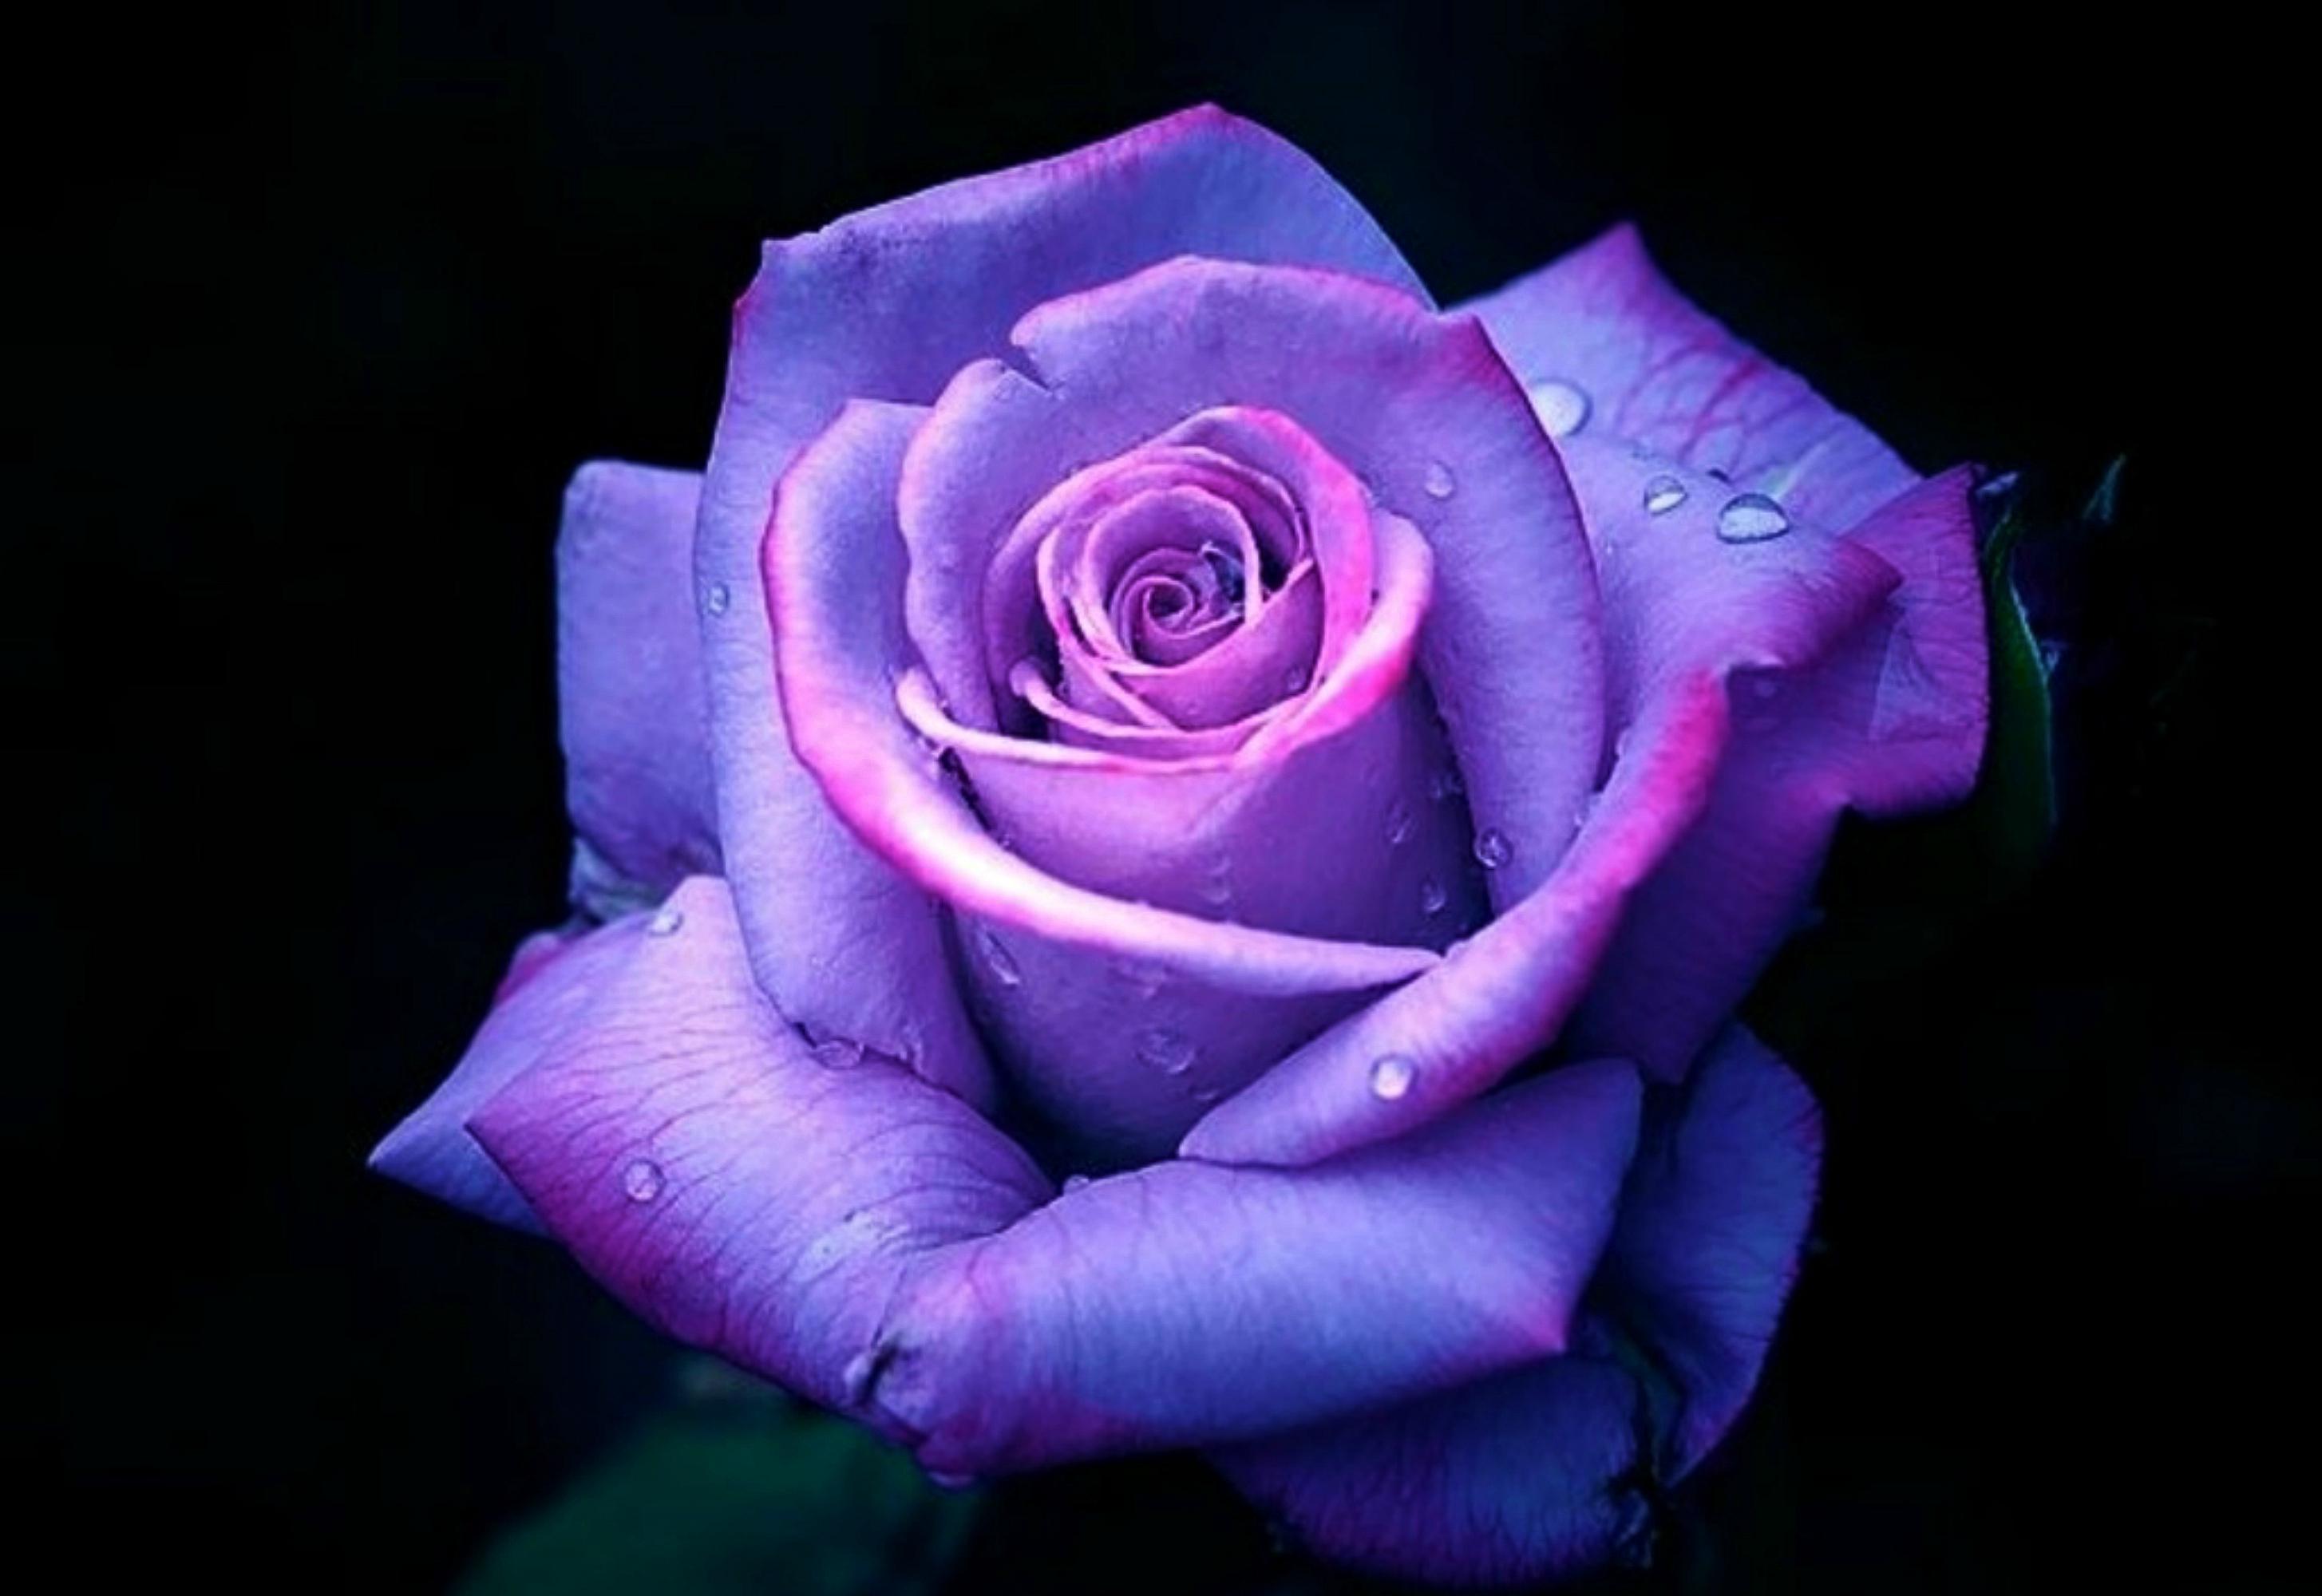 Images Of Purple Roses Hd Wallpaper High Quality Iphone Rose For ...